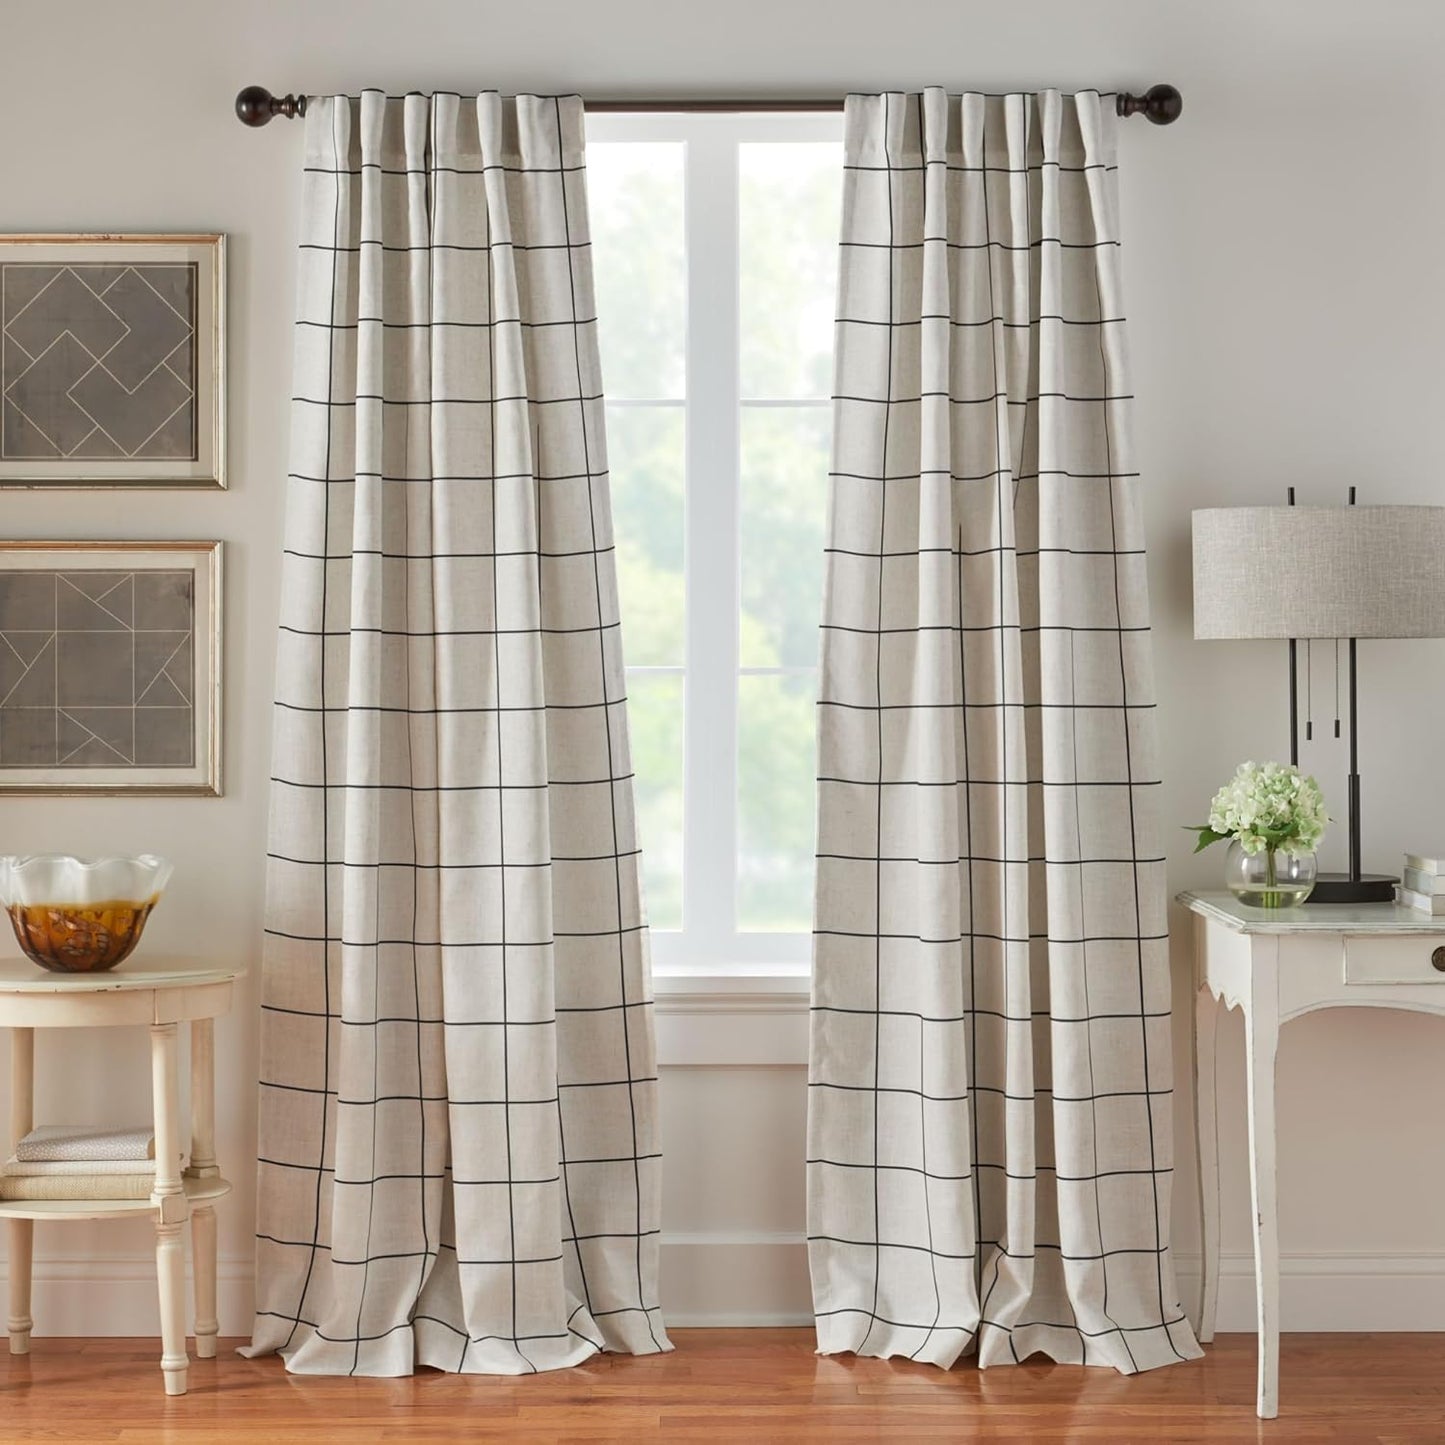 Elrene Home Fashions Brighton Windowpane Plaid Blackout Window Curtain, Living Room and Bedroom Drape with Rod Pocket Tabs, 52" X 95", Grey, 1 Panel  Elrene Home Fashions Black 52 In X 95 In 